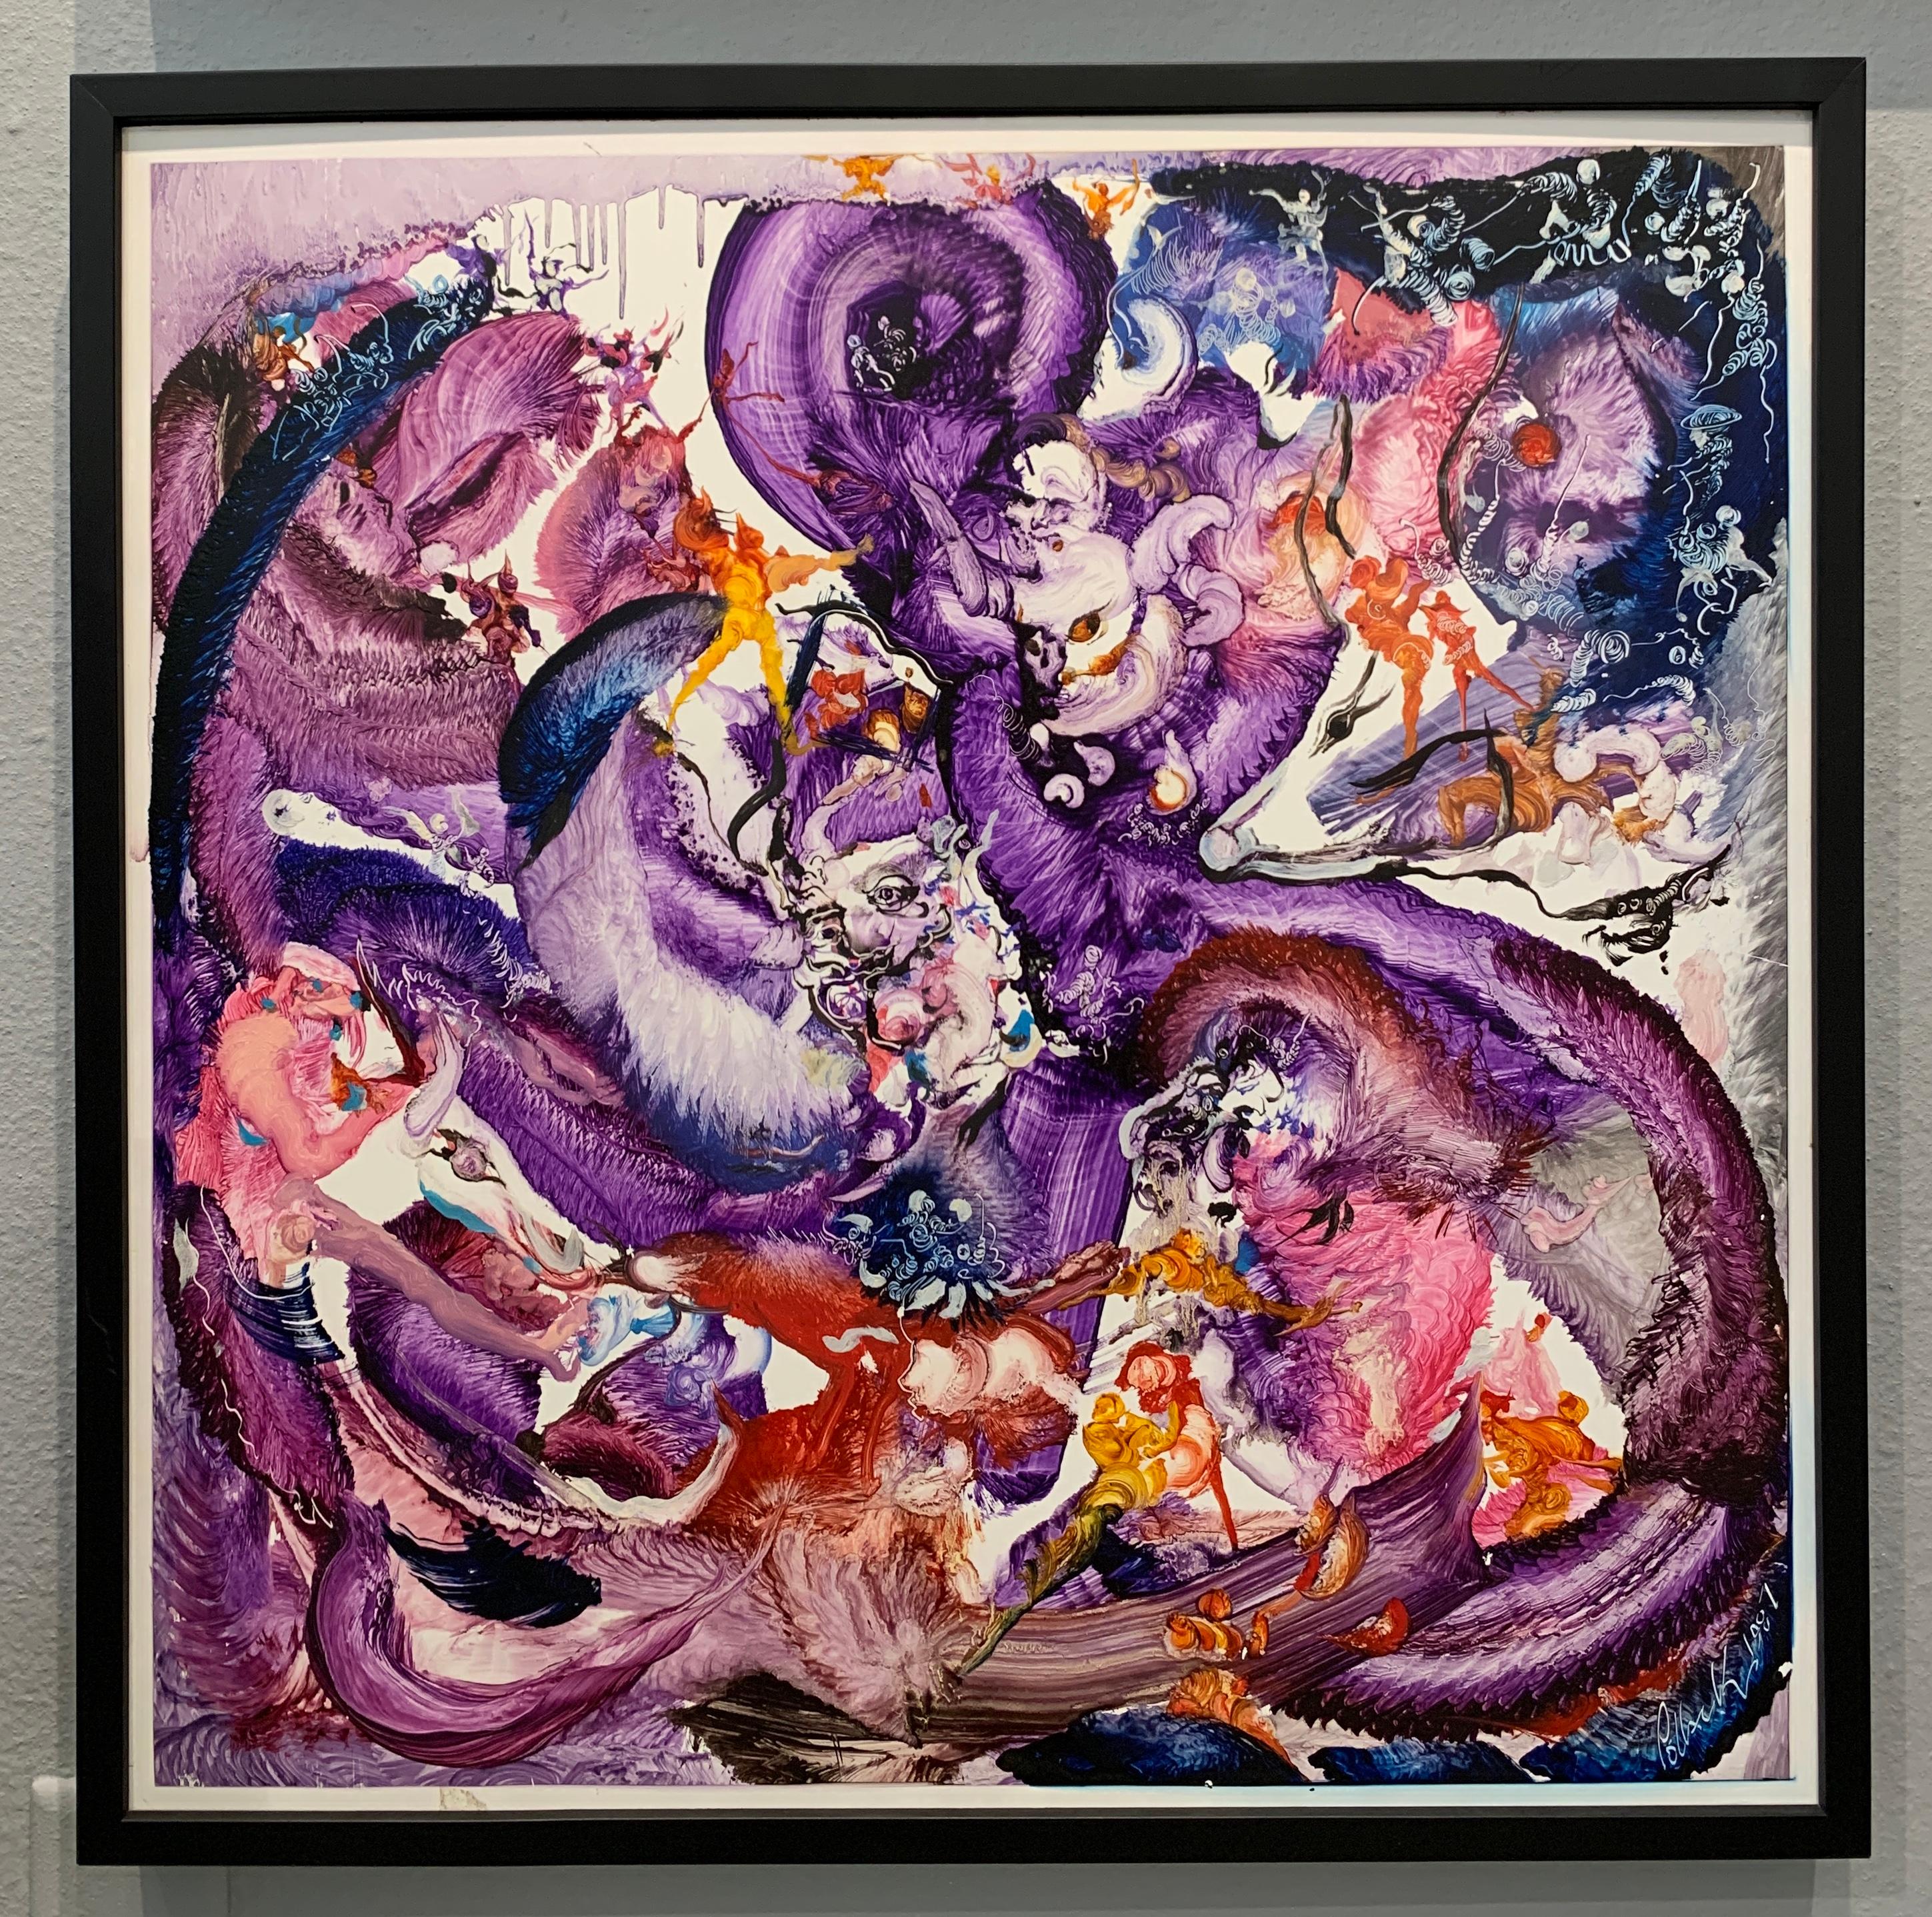 Year of Emotions, Reginald Pollack Abstract Expressionist Oil on Masonite Purple 1